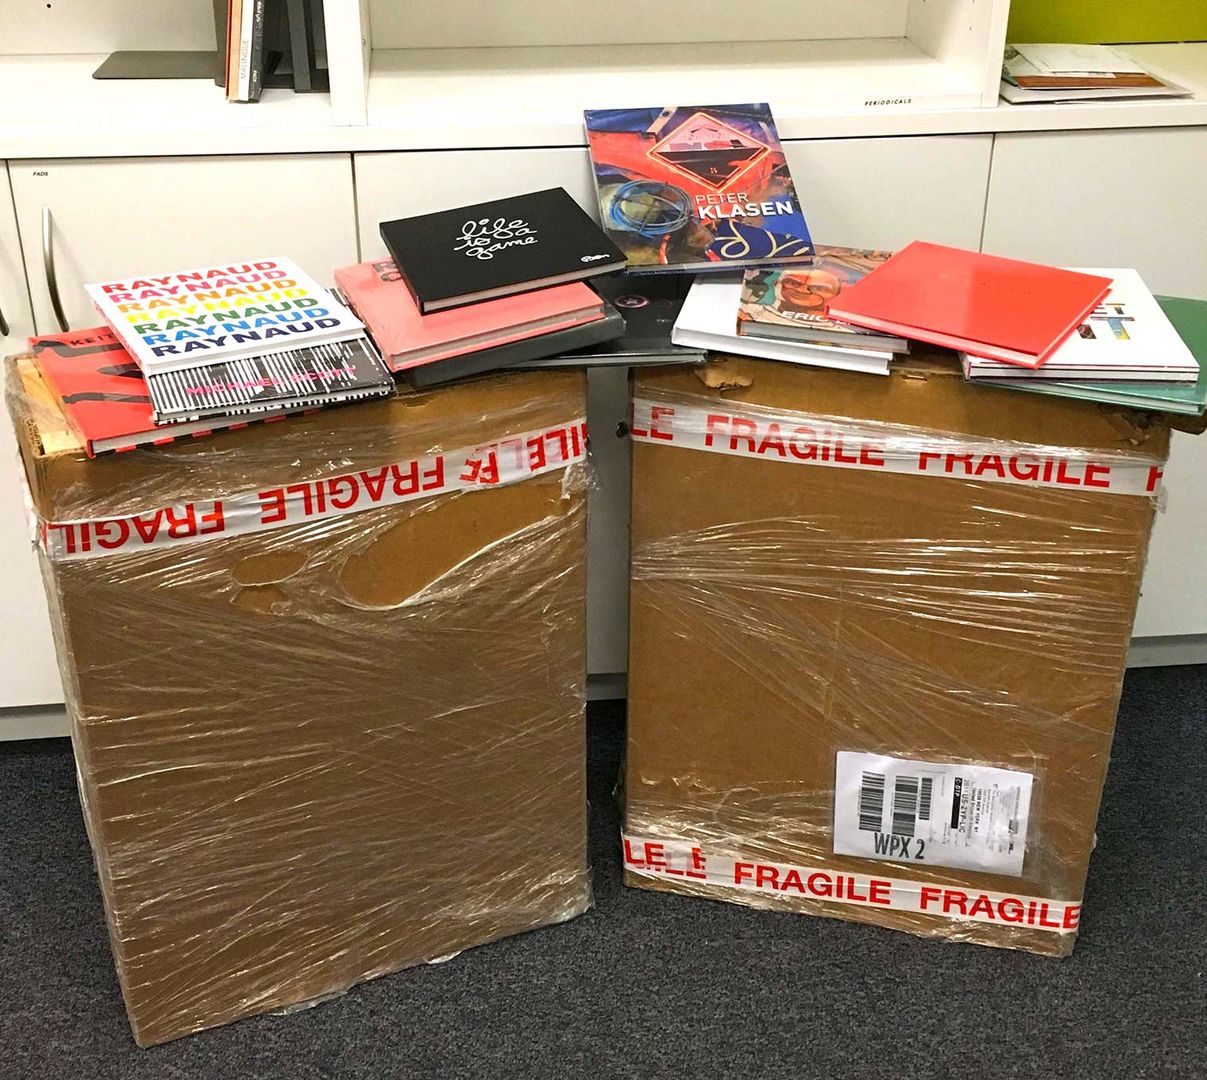 Two large shipping boxes filled with catalogs